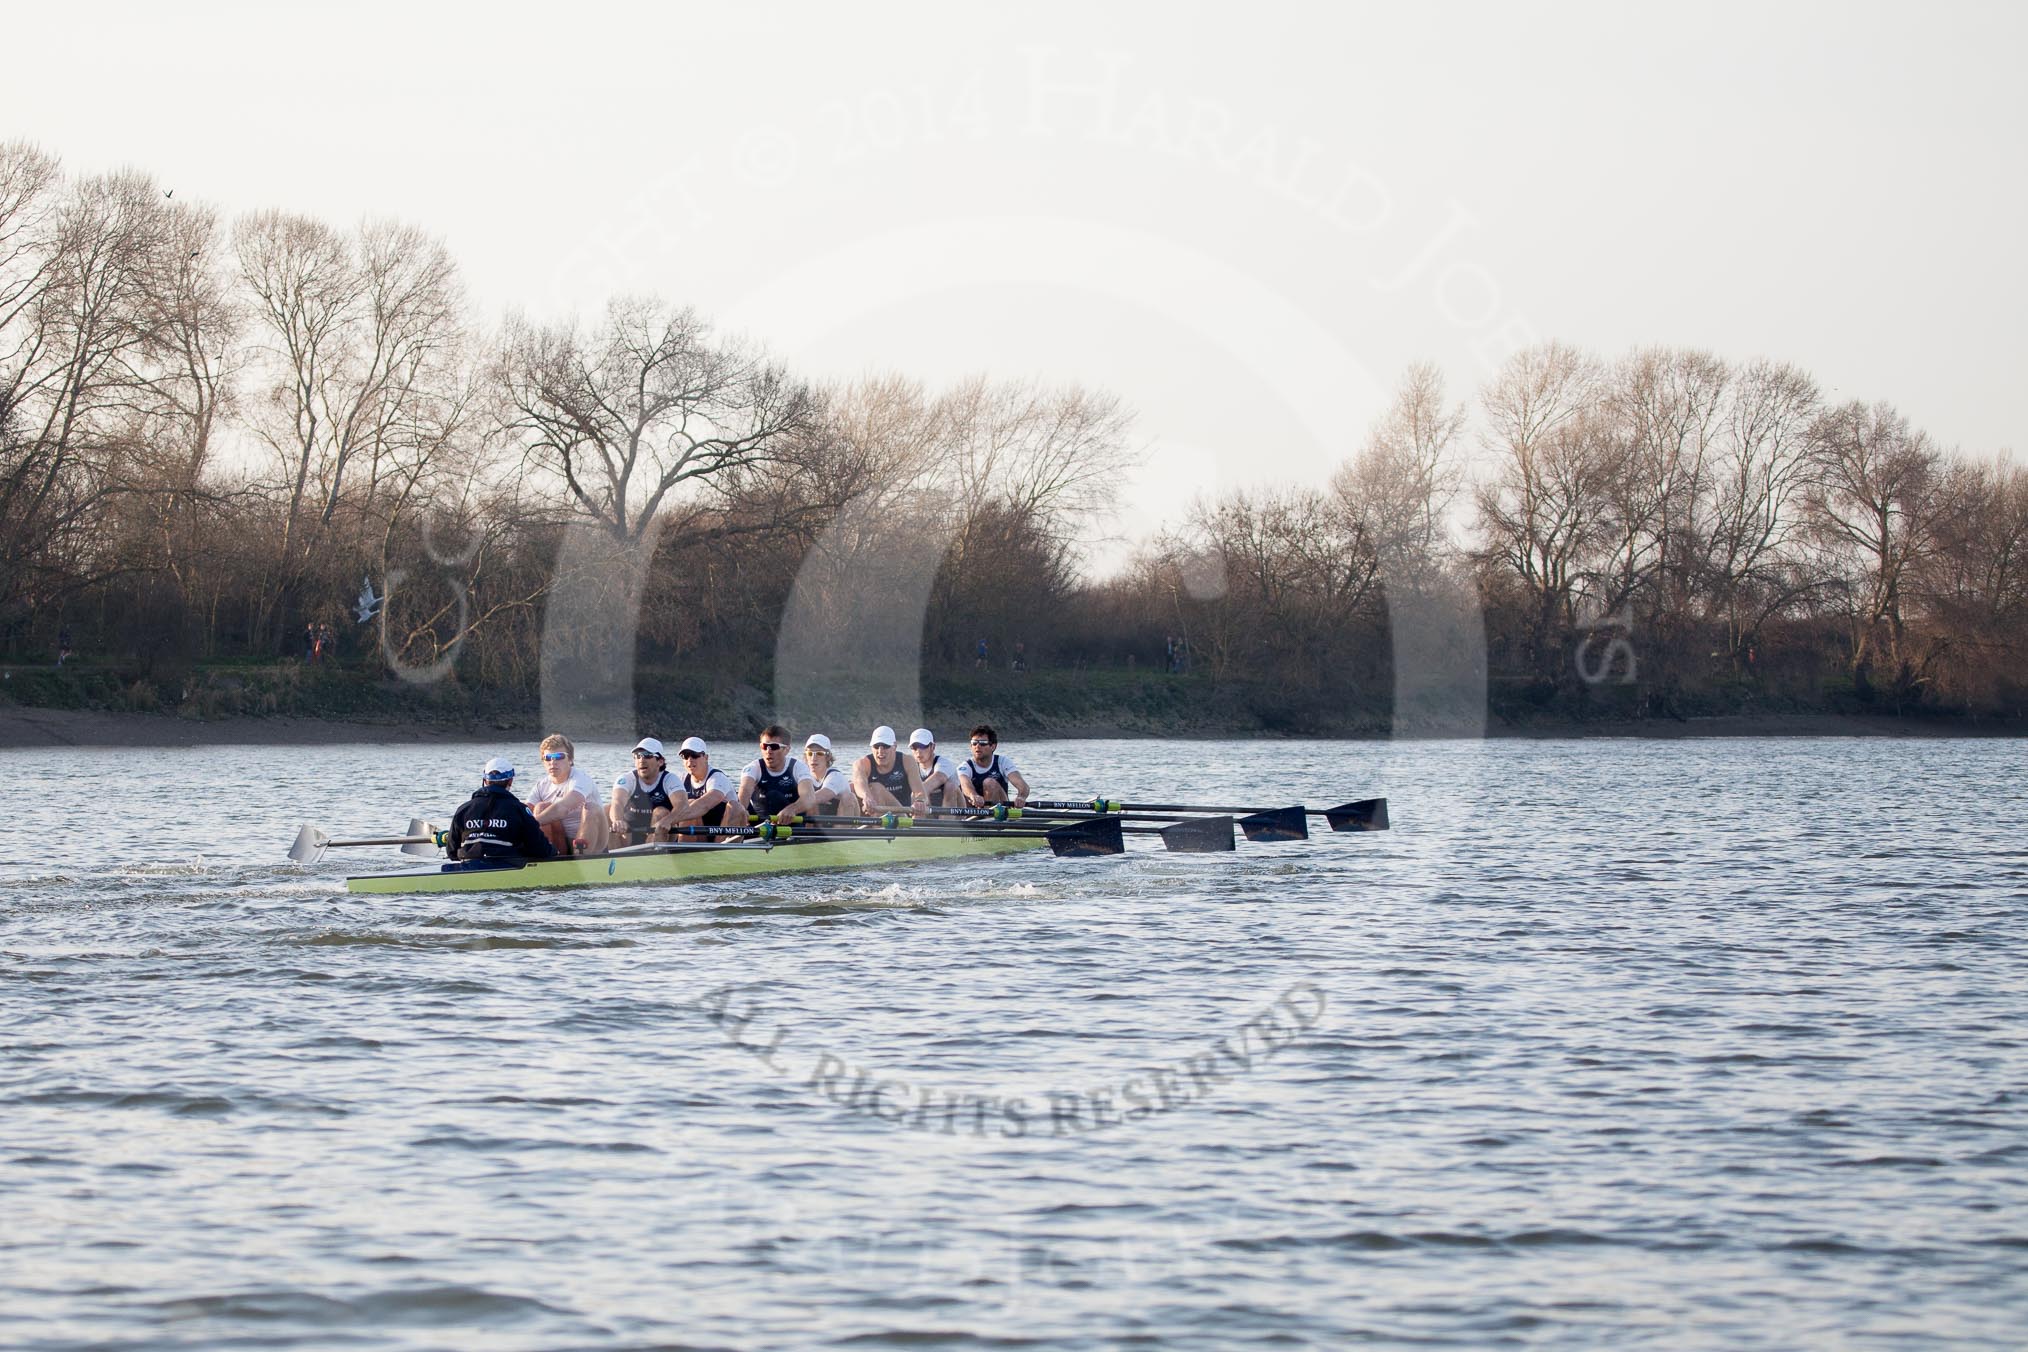 The Boat Race season 2014 - fixture OUBC vs German U23: The OUBC boat near the Mile Post..
River Thames between Putney Bridge and Chiswick Bridge,



on 08 March 2014 at 16:48, image #87